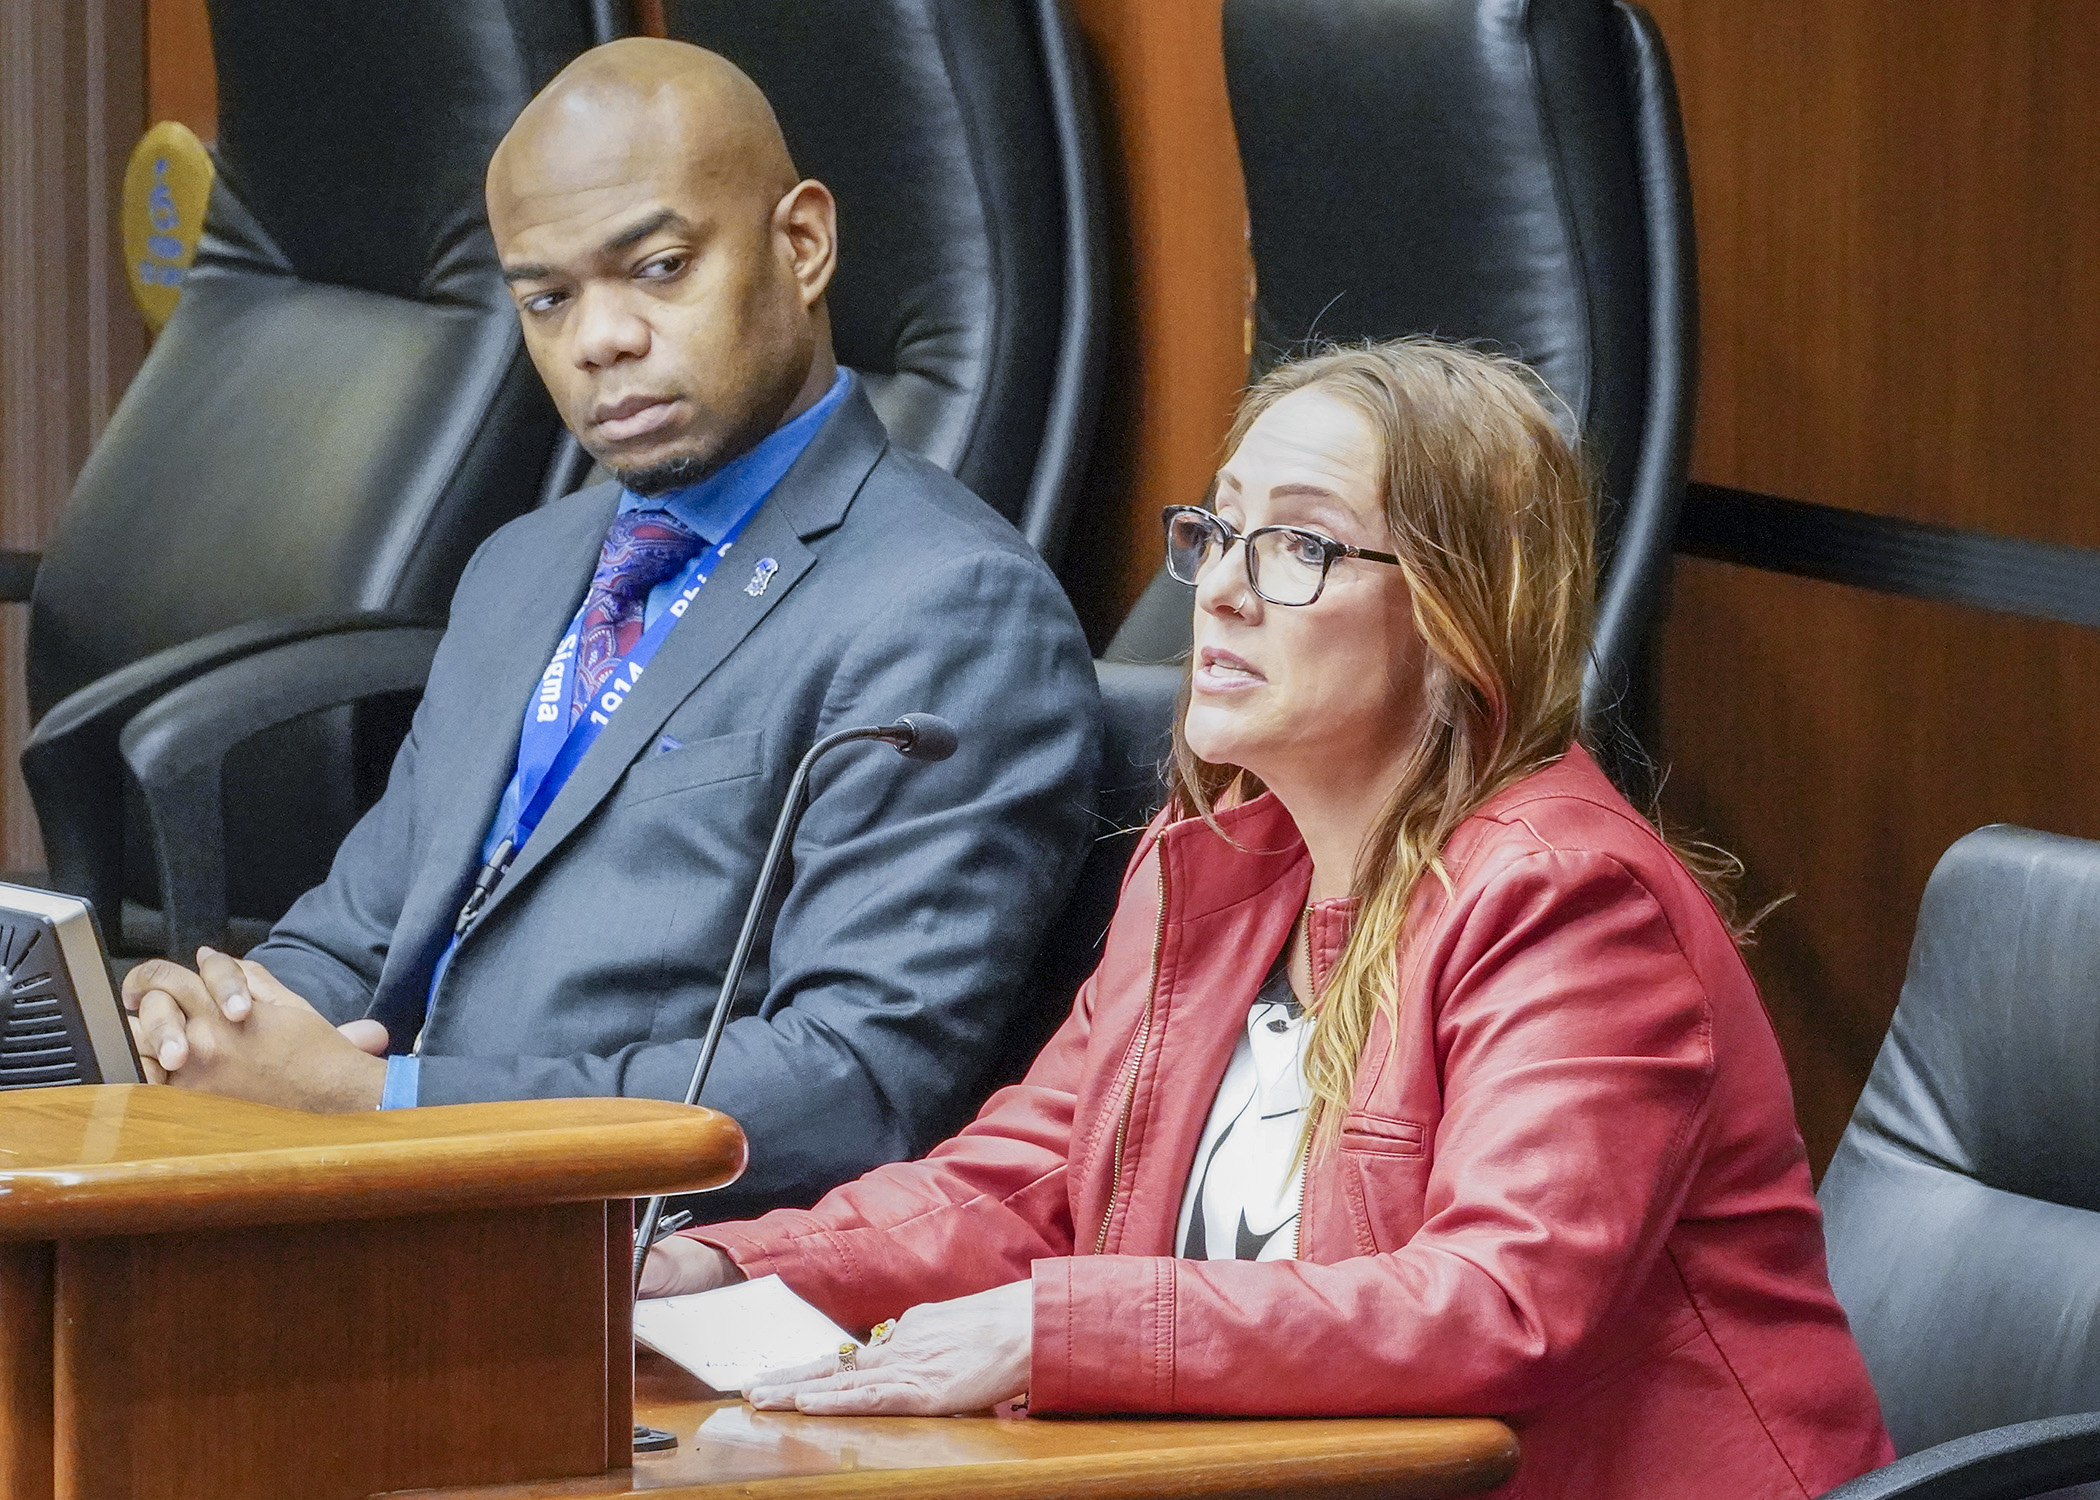 Amber Jochem, a victim of mistaken identity, testifies before the House public safety committee Feb. 14 in support of a bill to help victims of identity theft clear their names in court records. Rep. Cedrick Frazier is the sponsor. (Photo by Andrew VonBank)